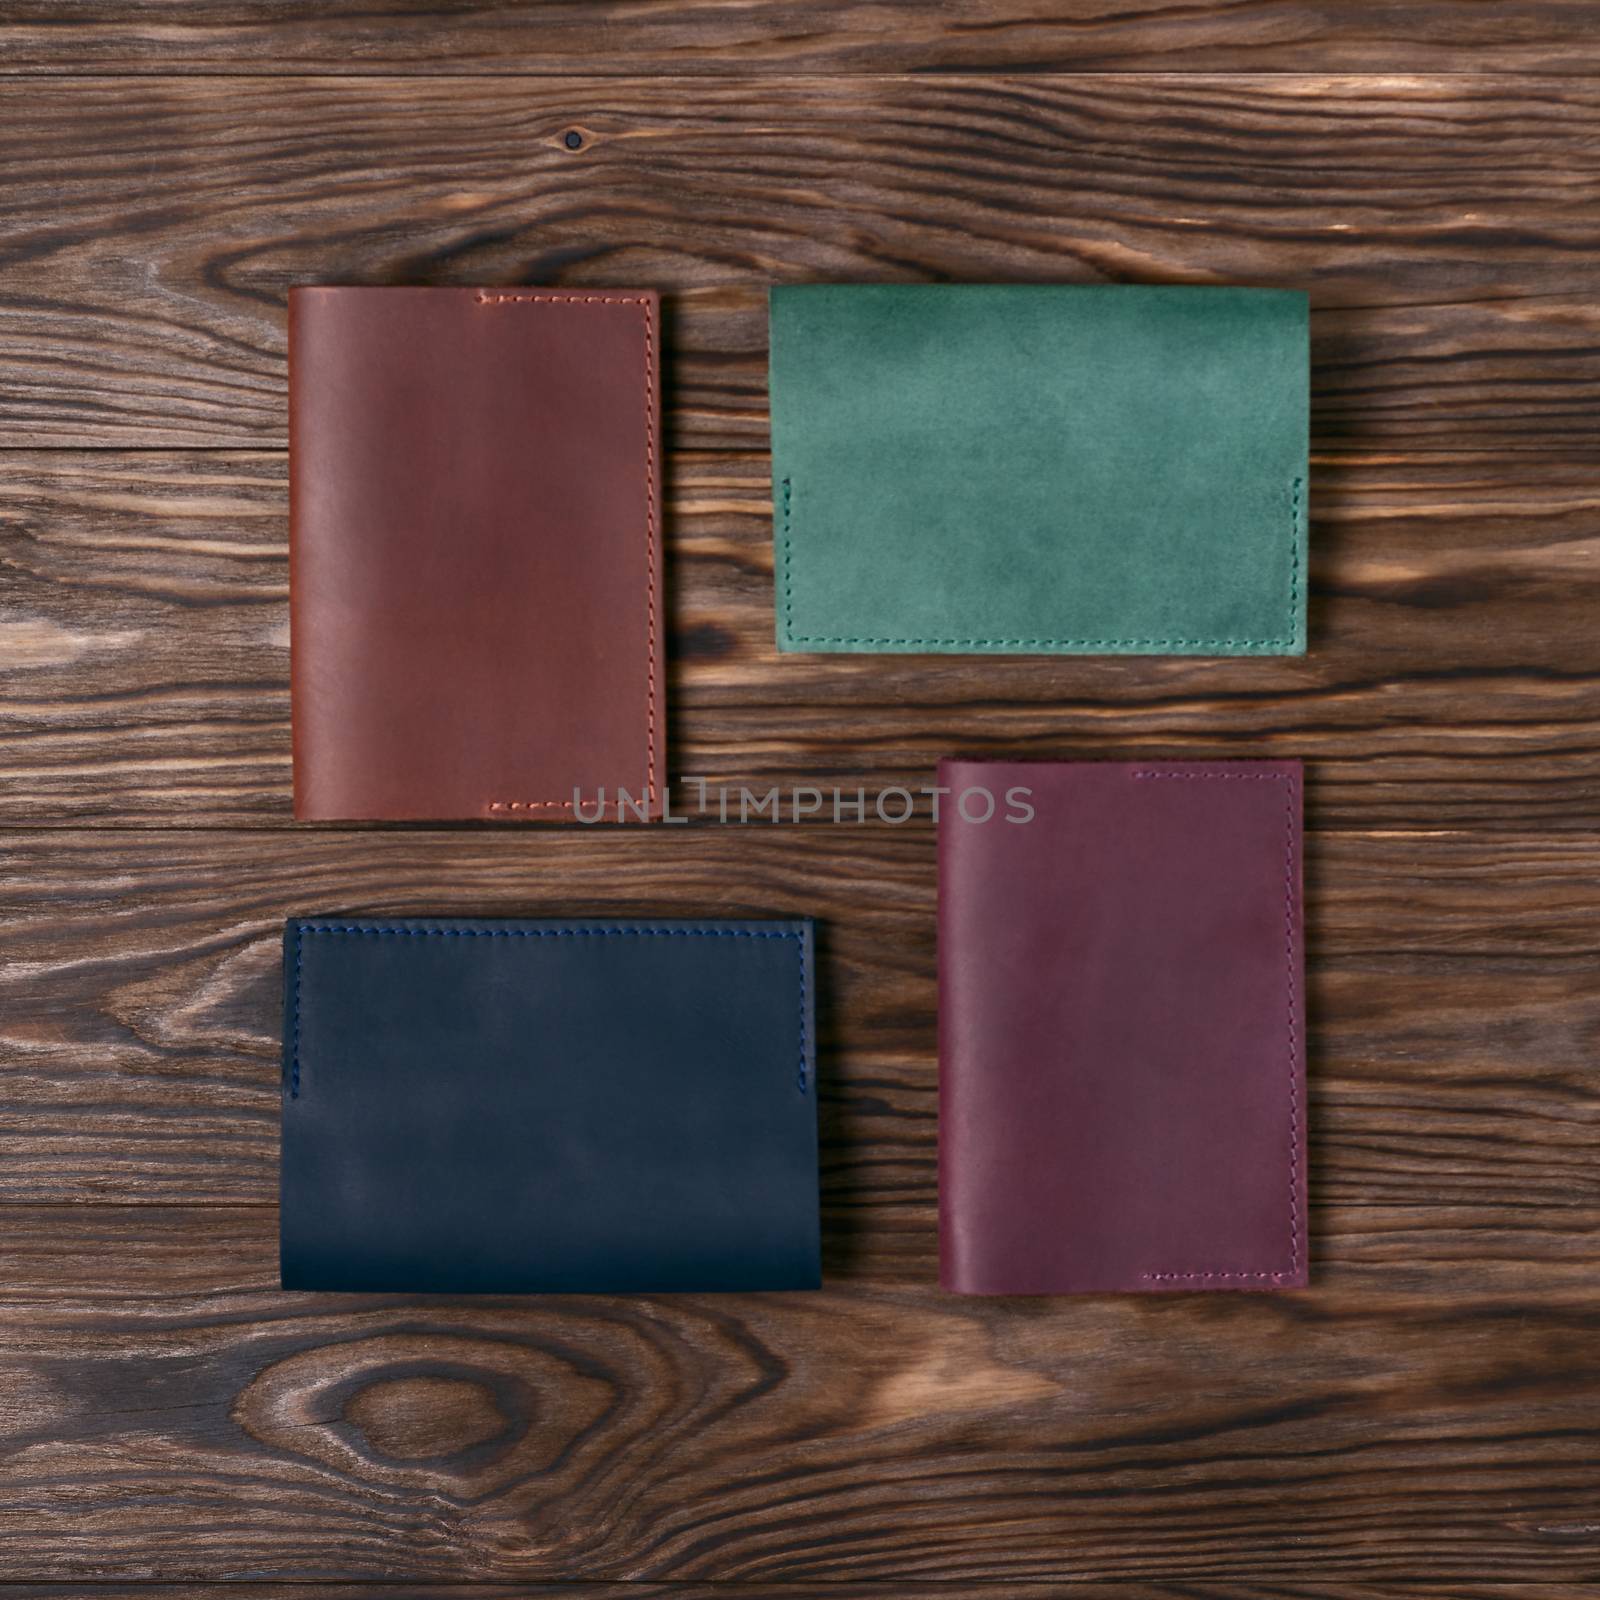 Four handmade leather passport covers on wooden textured background. Up to down view. Stock photo of luxury accessories.